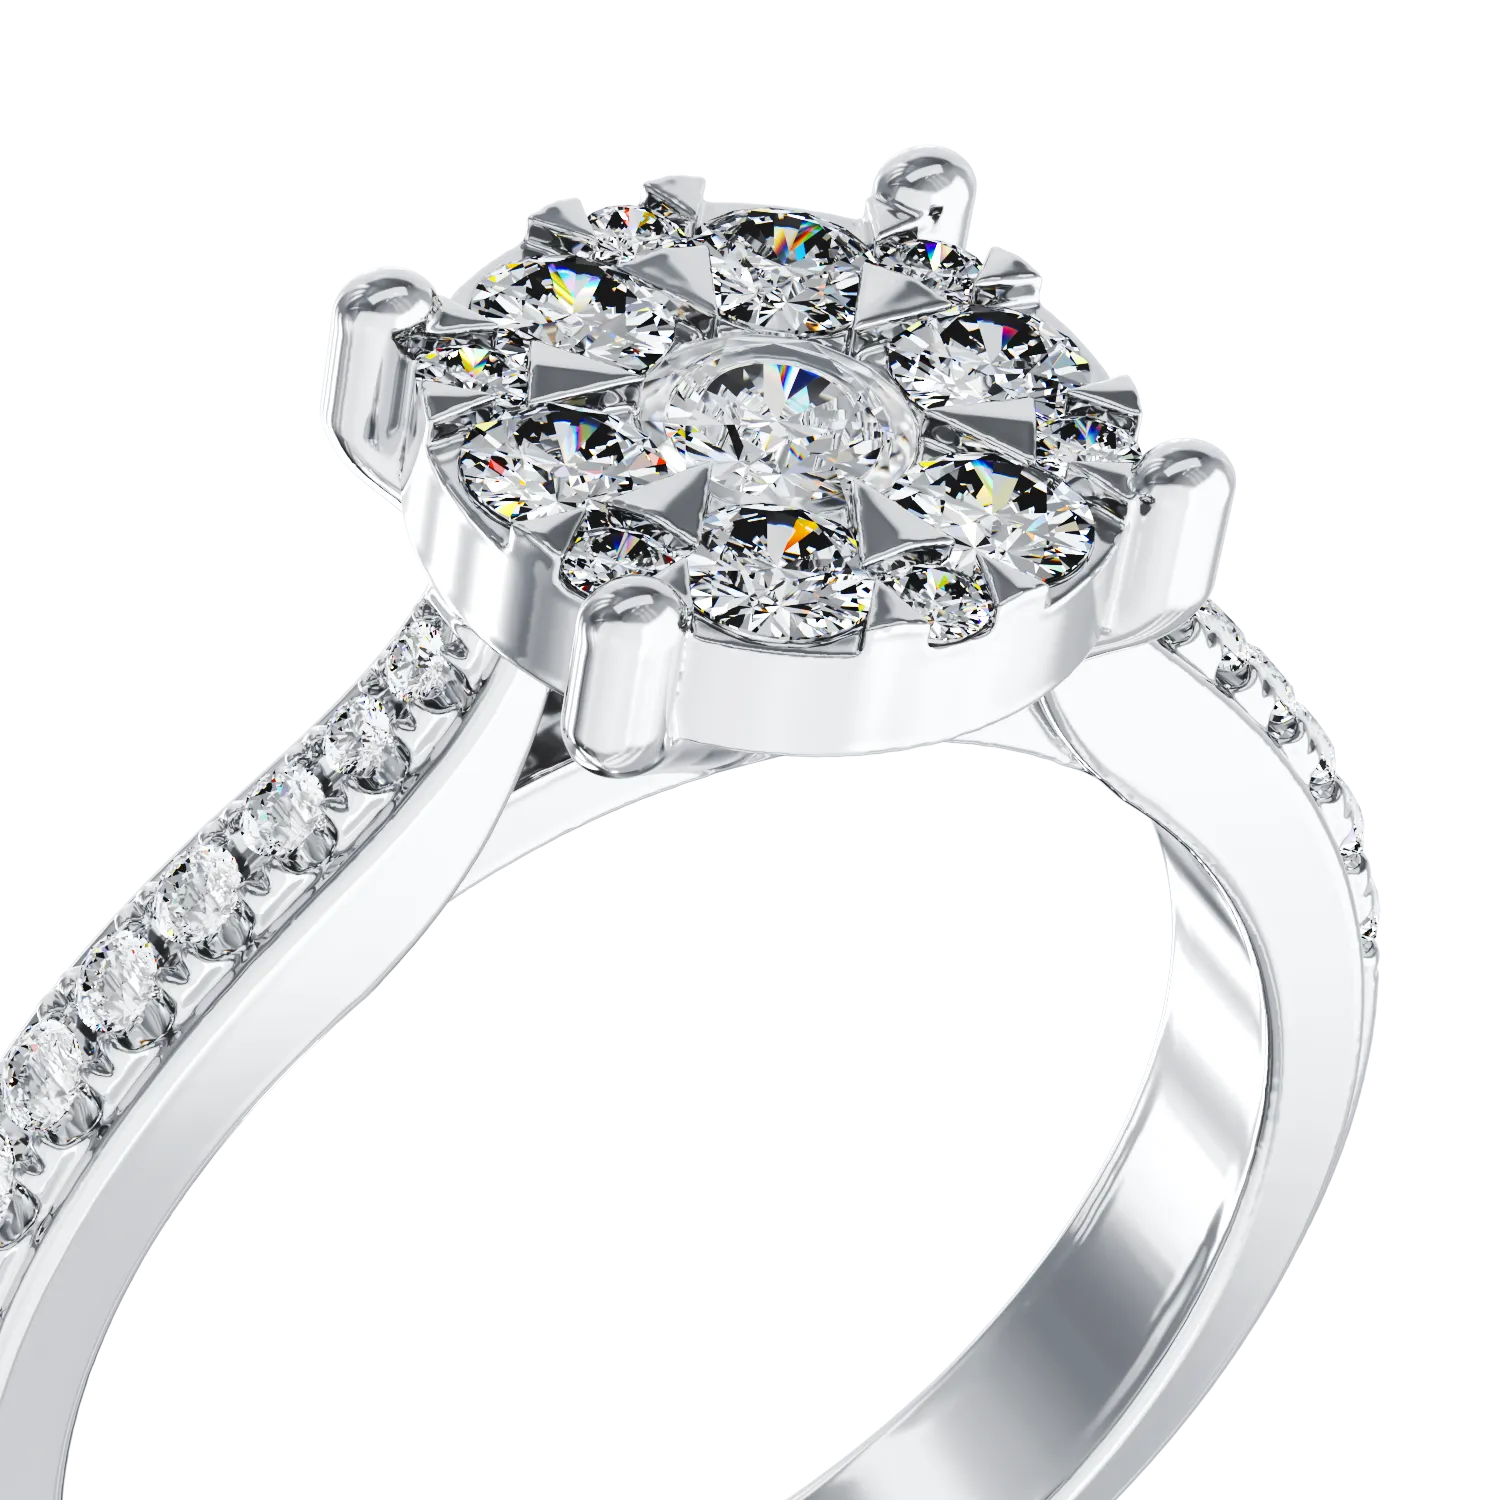 18K white gold engagement ring with 0.48ct diamonds